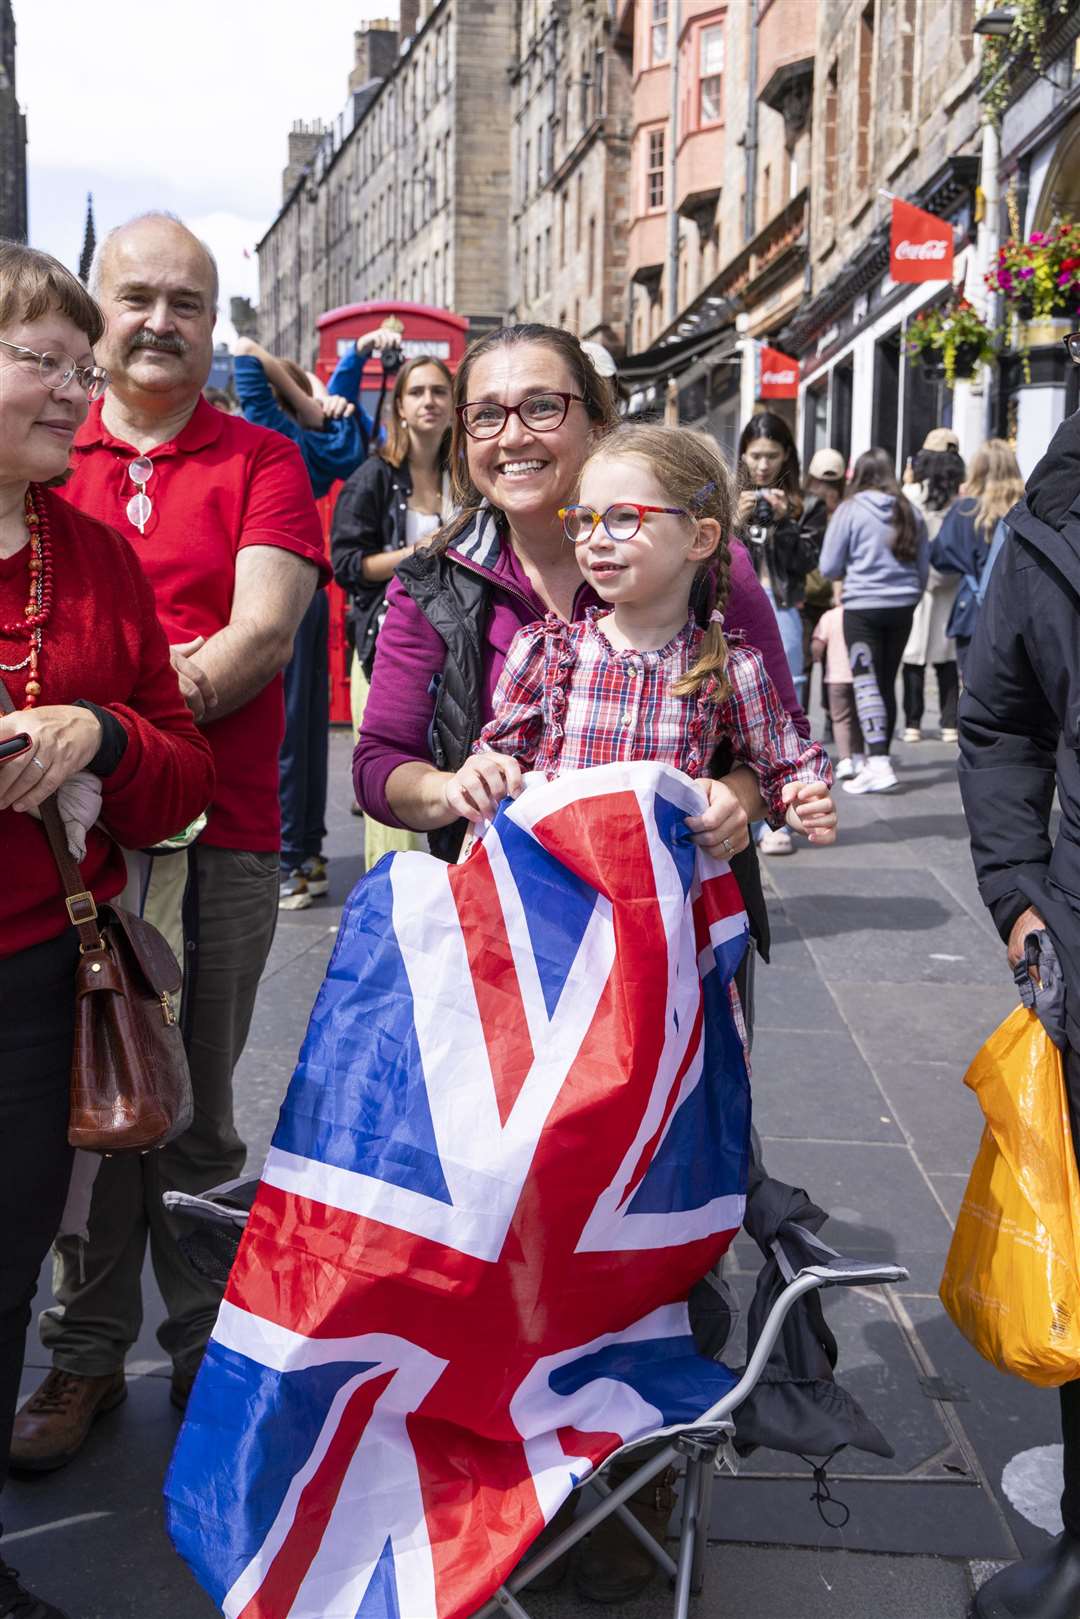 Members of the public on the Royal Mile await the arrival of the royal procession (Jamie Williamson/Daily Mail/PA)